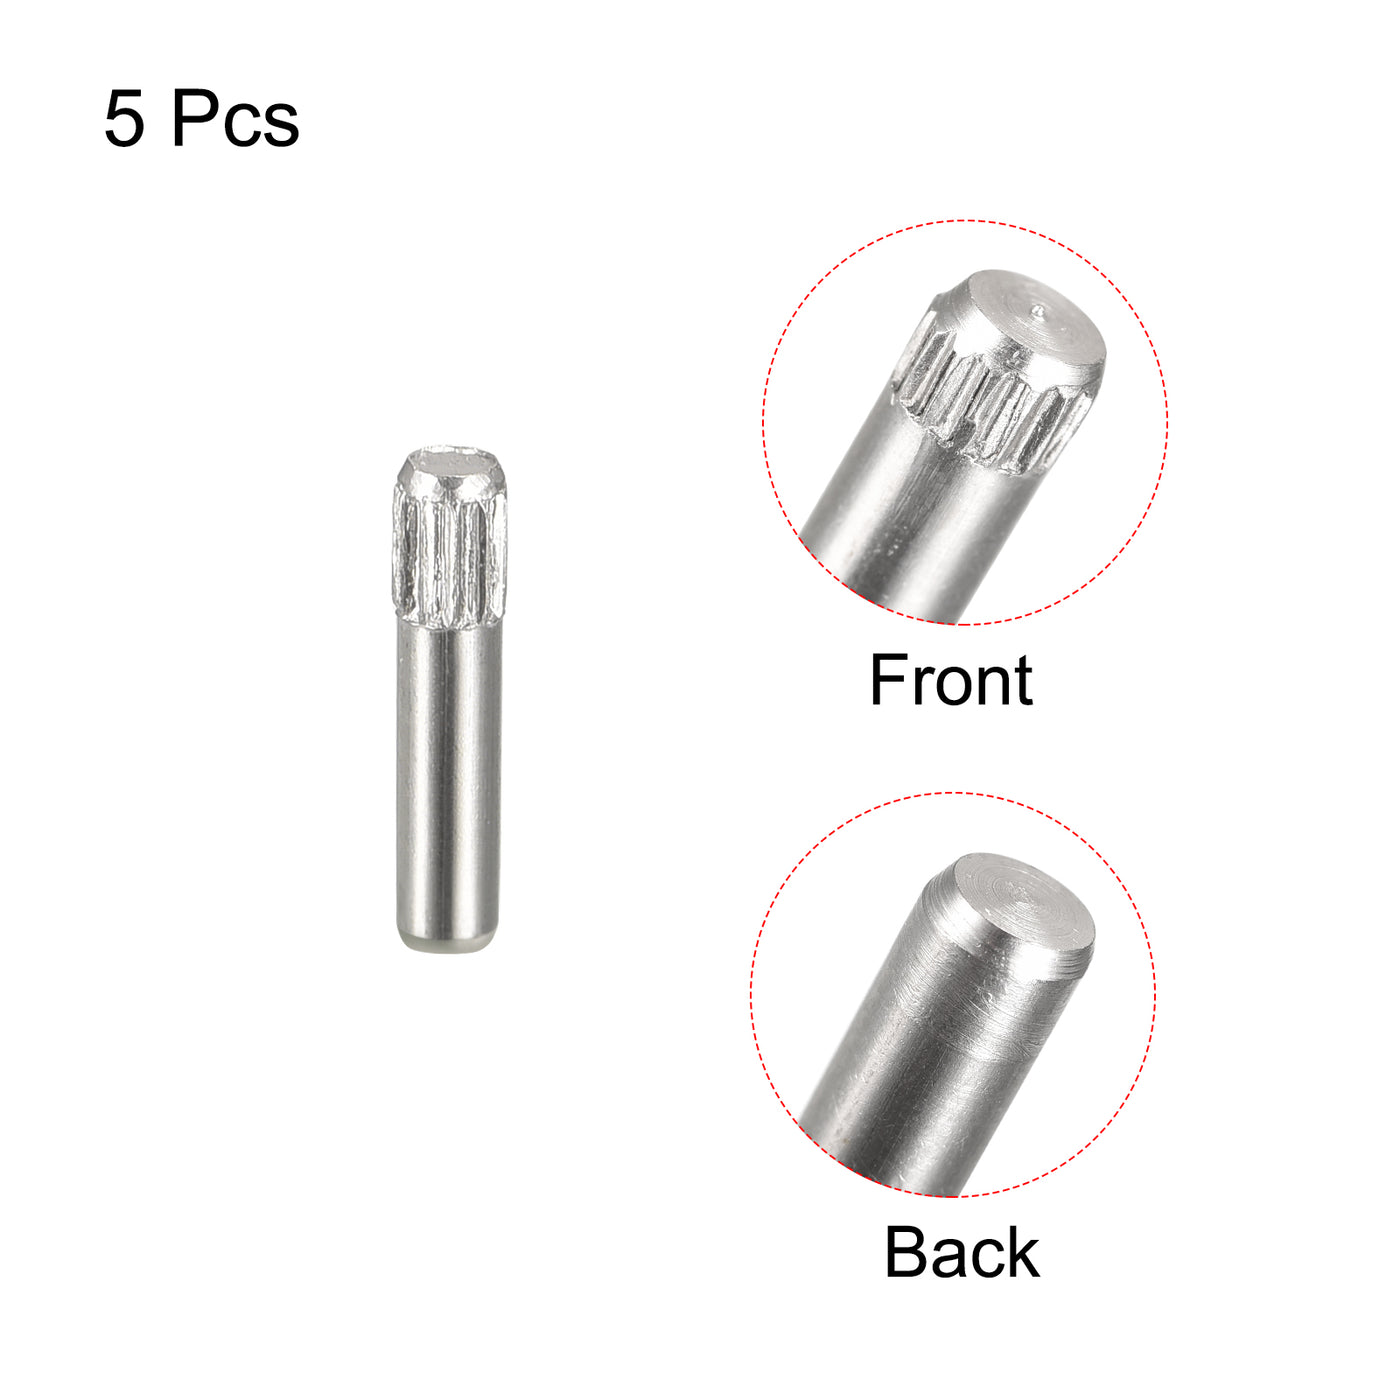 uxcell Uxcell 2x10mm 304 Stainless Steel Dowel Pins, 5Pcs Knurled Head Flat End Dowel Pin